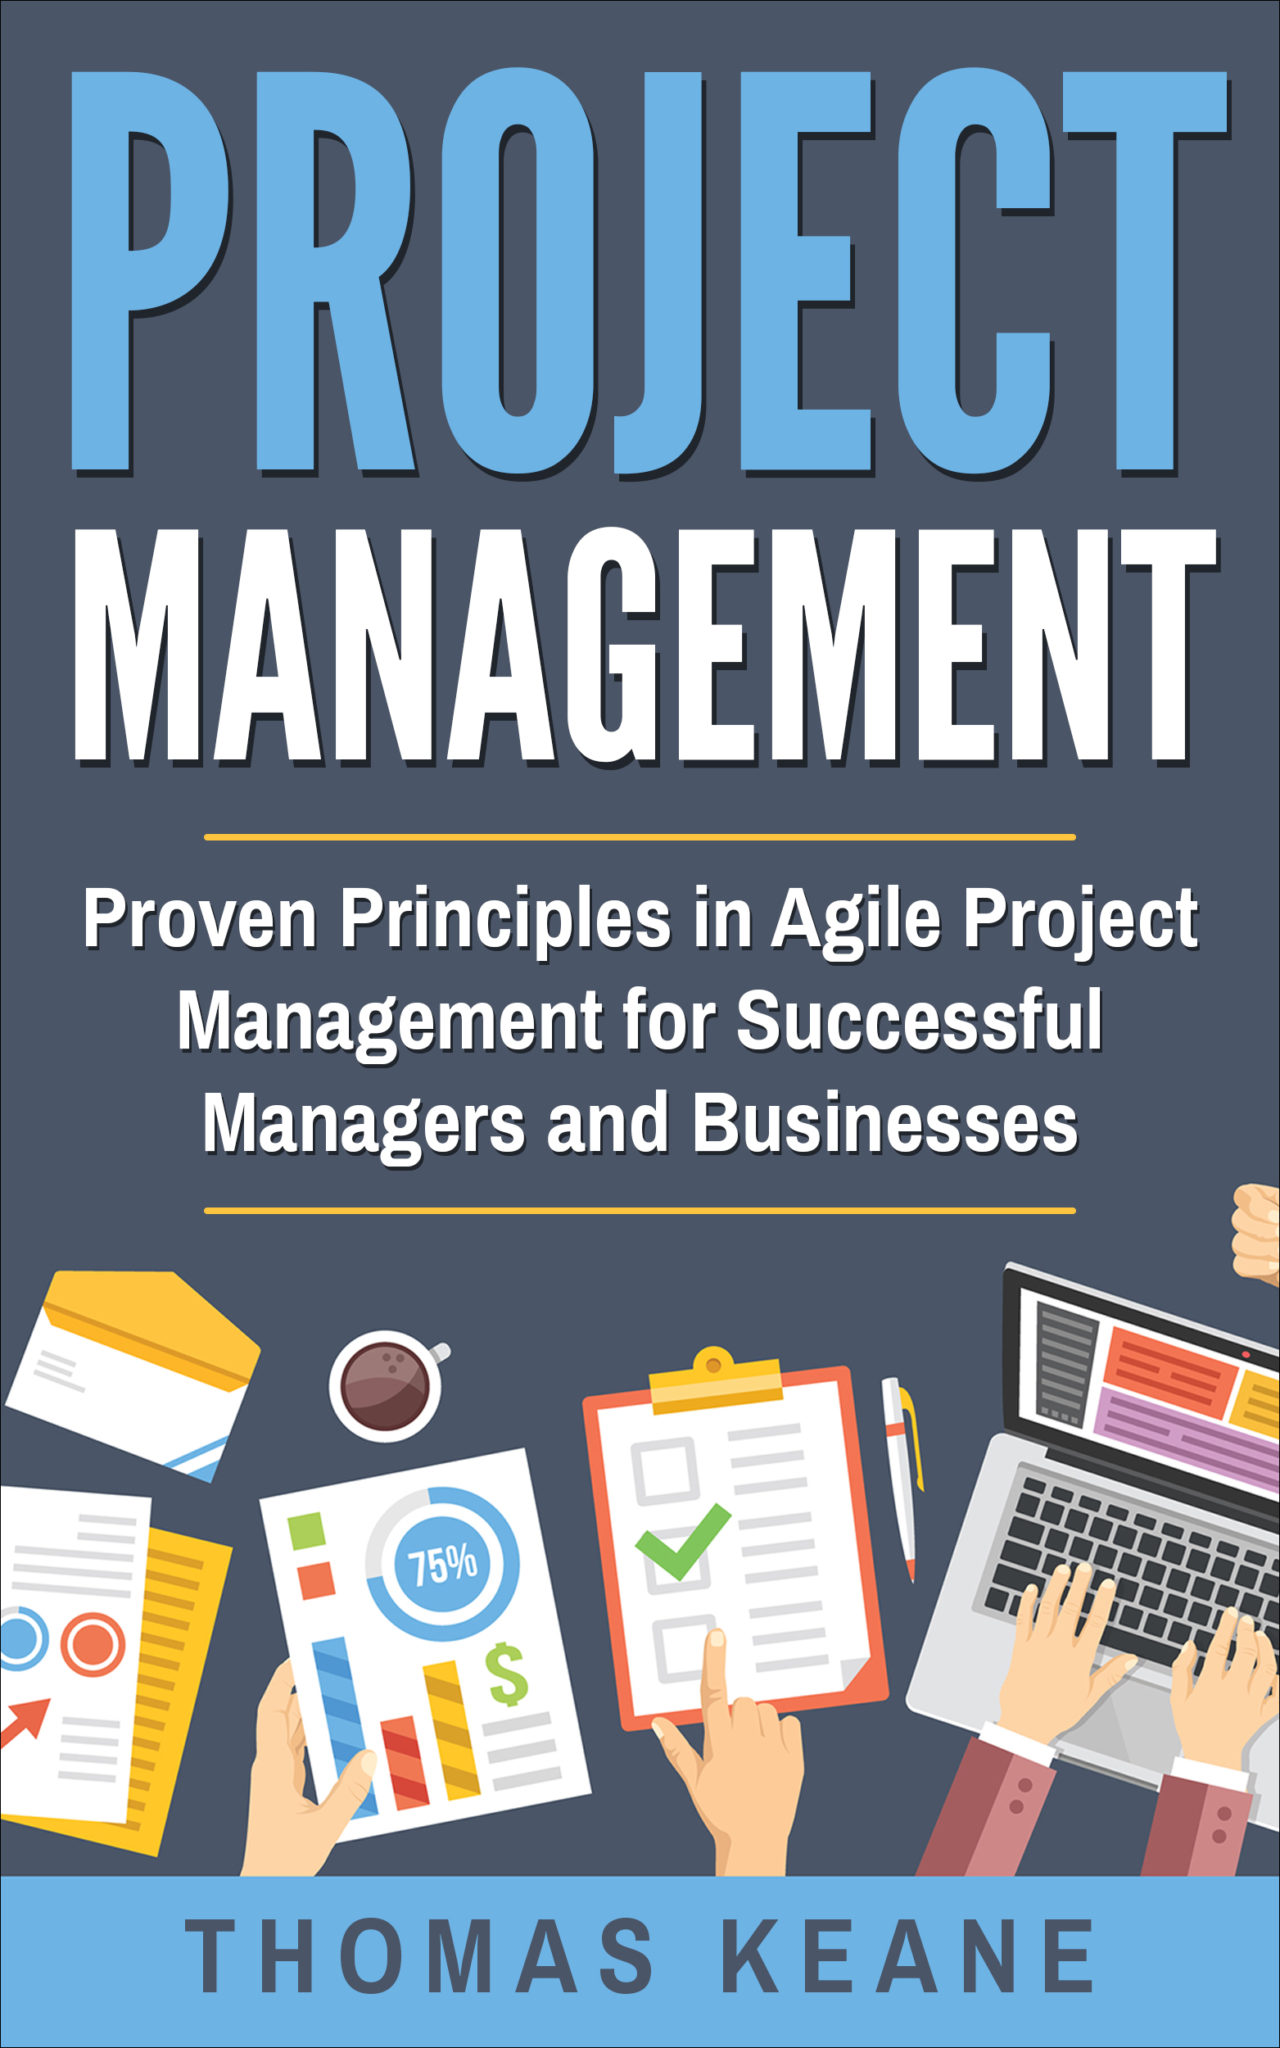 FREE: Project Management: Proven Principles in Agile Project Management for Successful Managers and Businesses by Thomas Keane